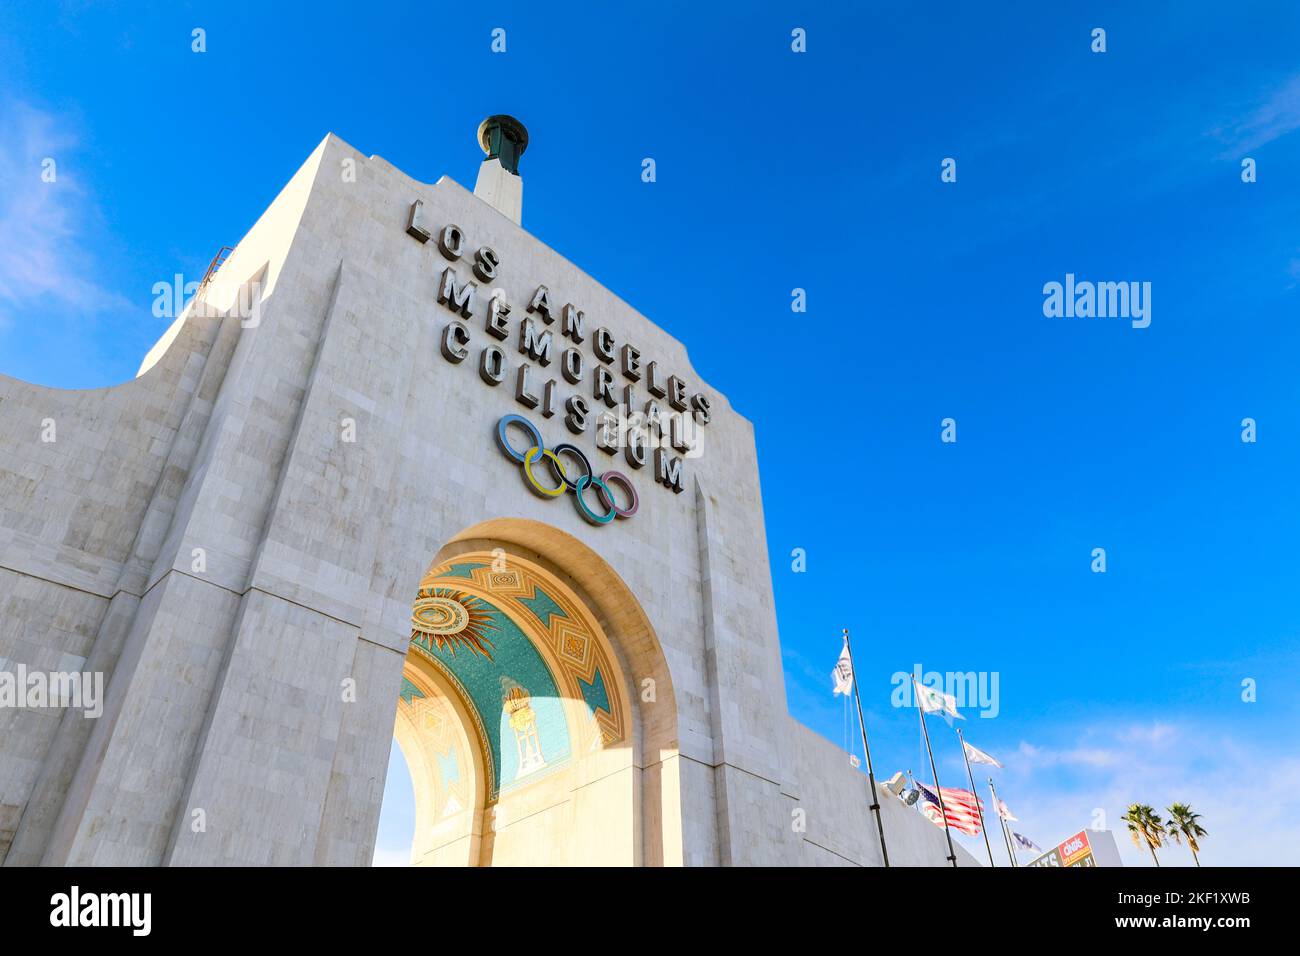 Los Angeles, CA - November 2022: Los Angeles Memorial Coliseum, home to USC football, Olympics and other events. Stock Photo